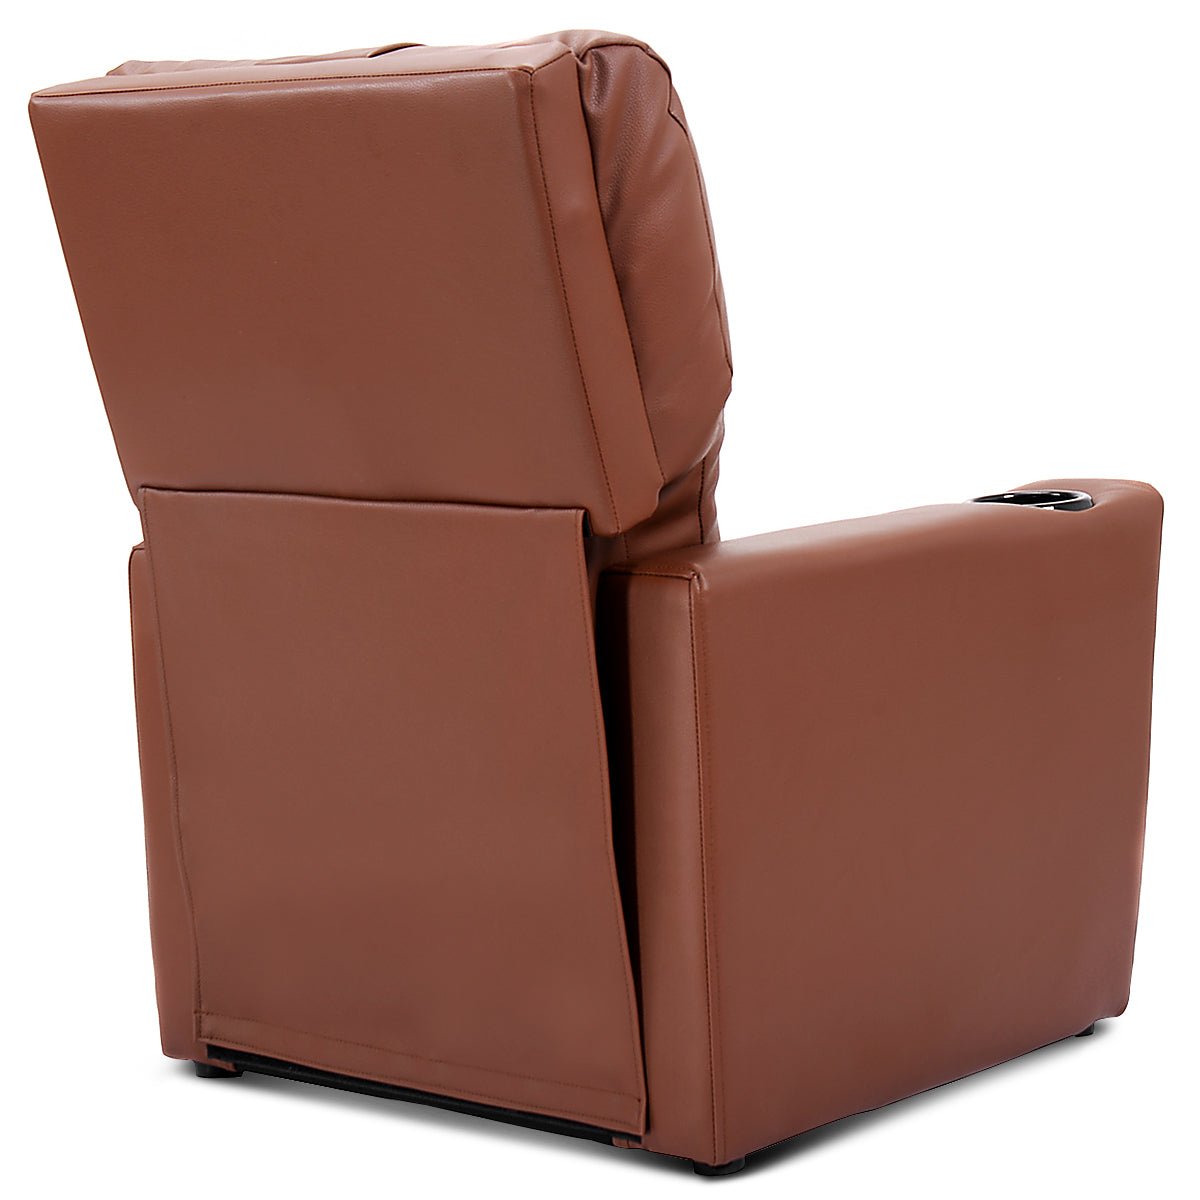 Adjustable Children's Lounge Chair: High Backrest and Armrest - Classic Brown